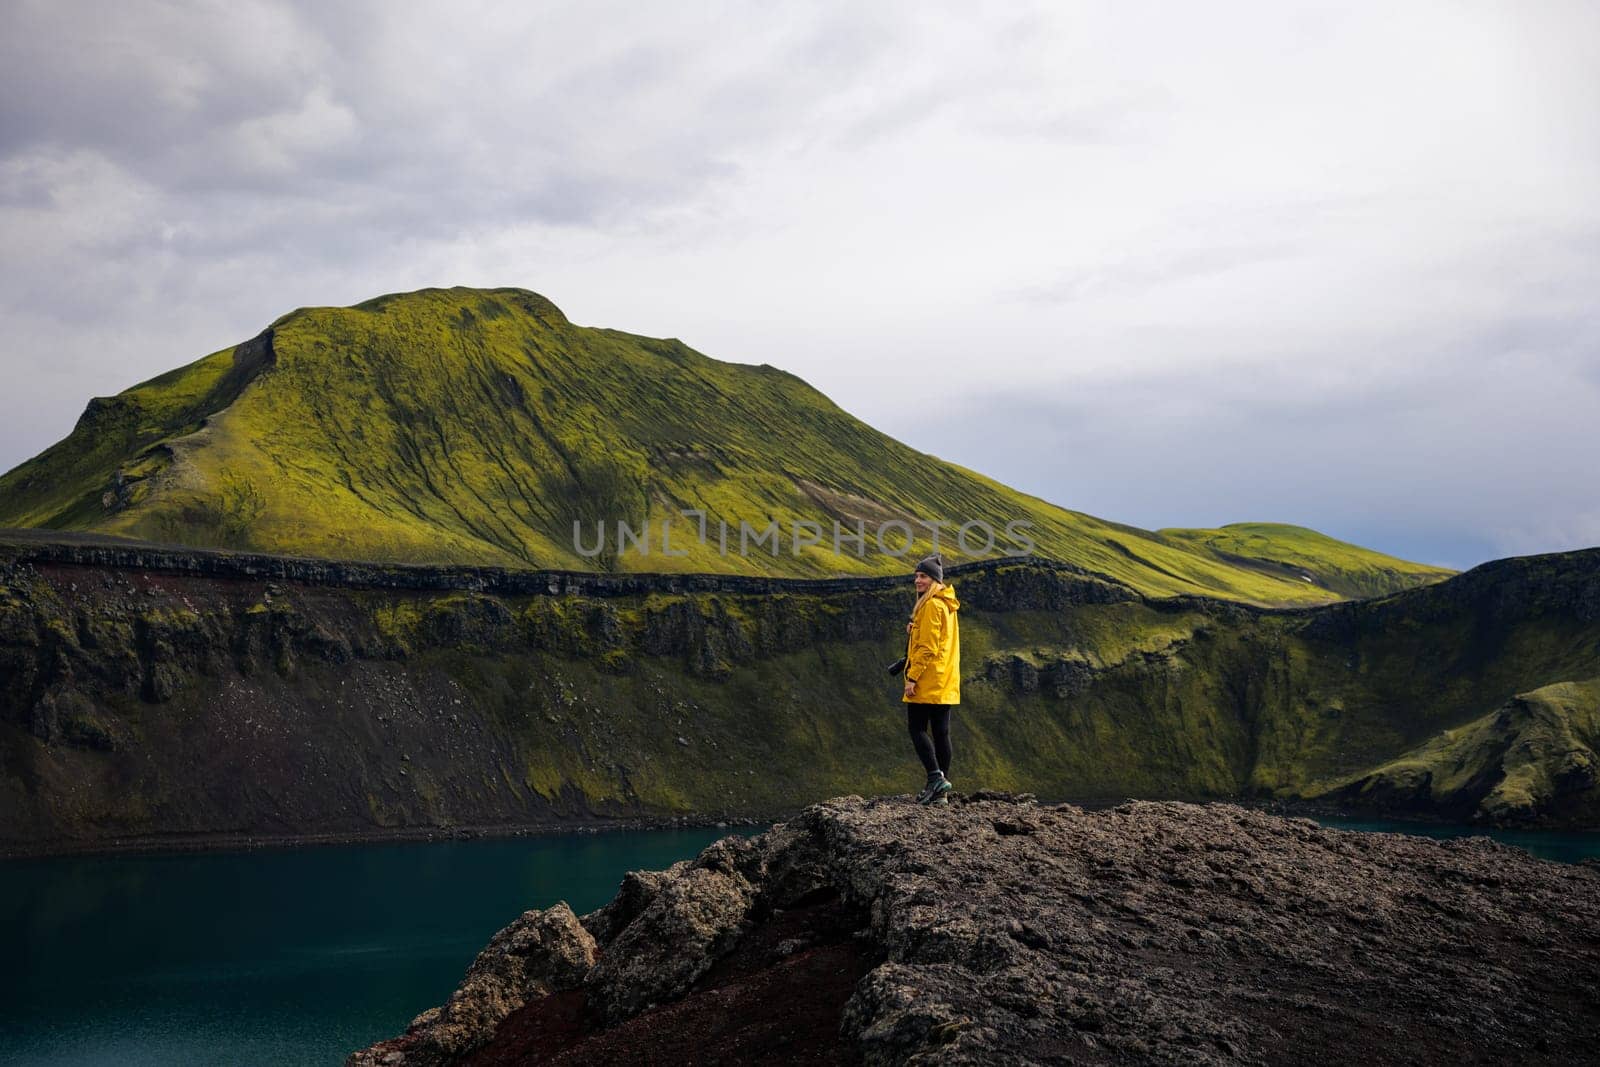 This photo shows a backpacker girl smiling at the view. She is wearing a yellow trekking jacket and a hat, and she has a camera slung over her shoulder. The sky is cloudy, and the background is a mountain range. This photo is perfect for use in travel and nature photography. It could be used to illustrate a story about hiking in the mountains, or it could simply be used to create a sense of happiness and contentment.